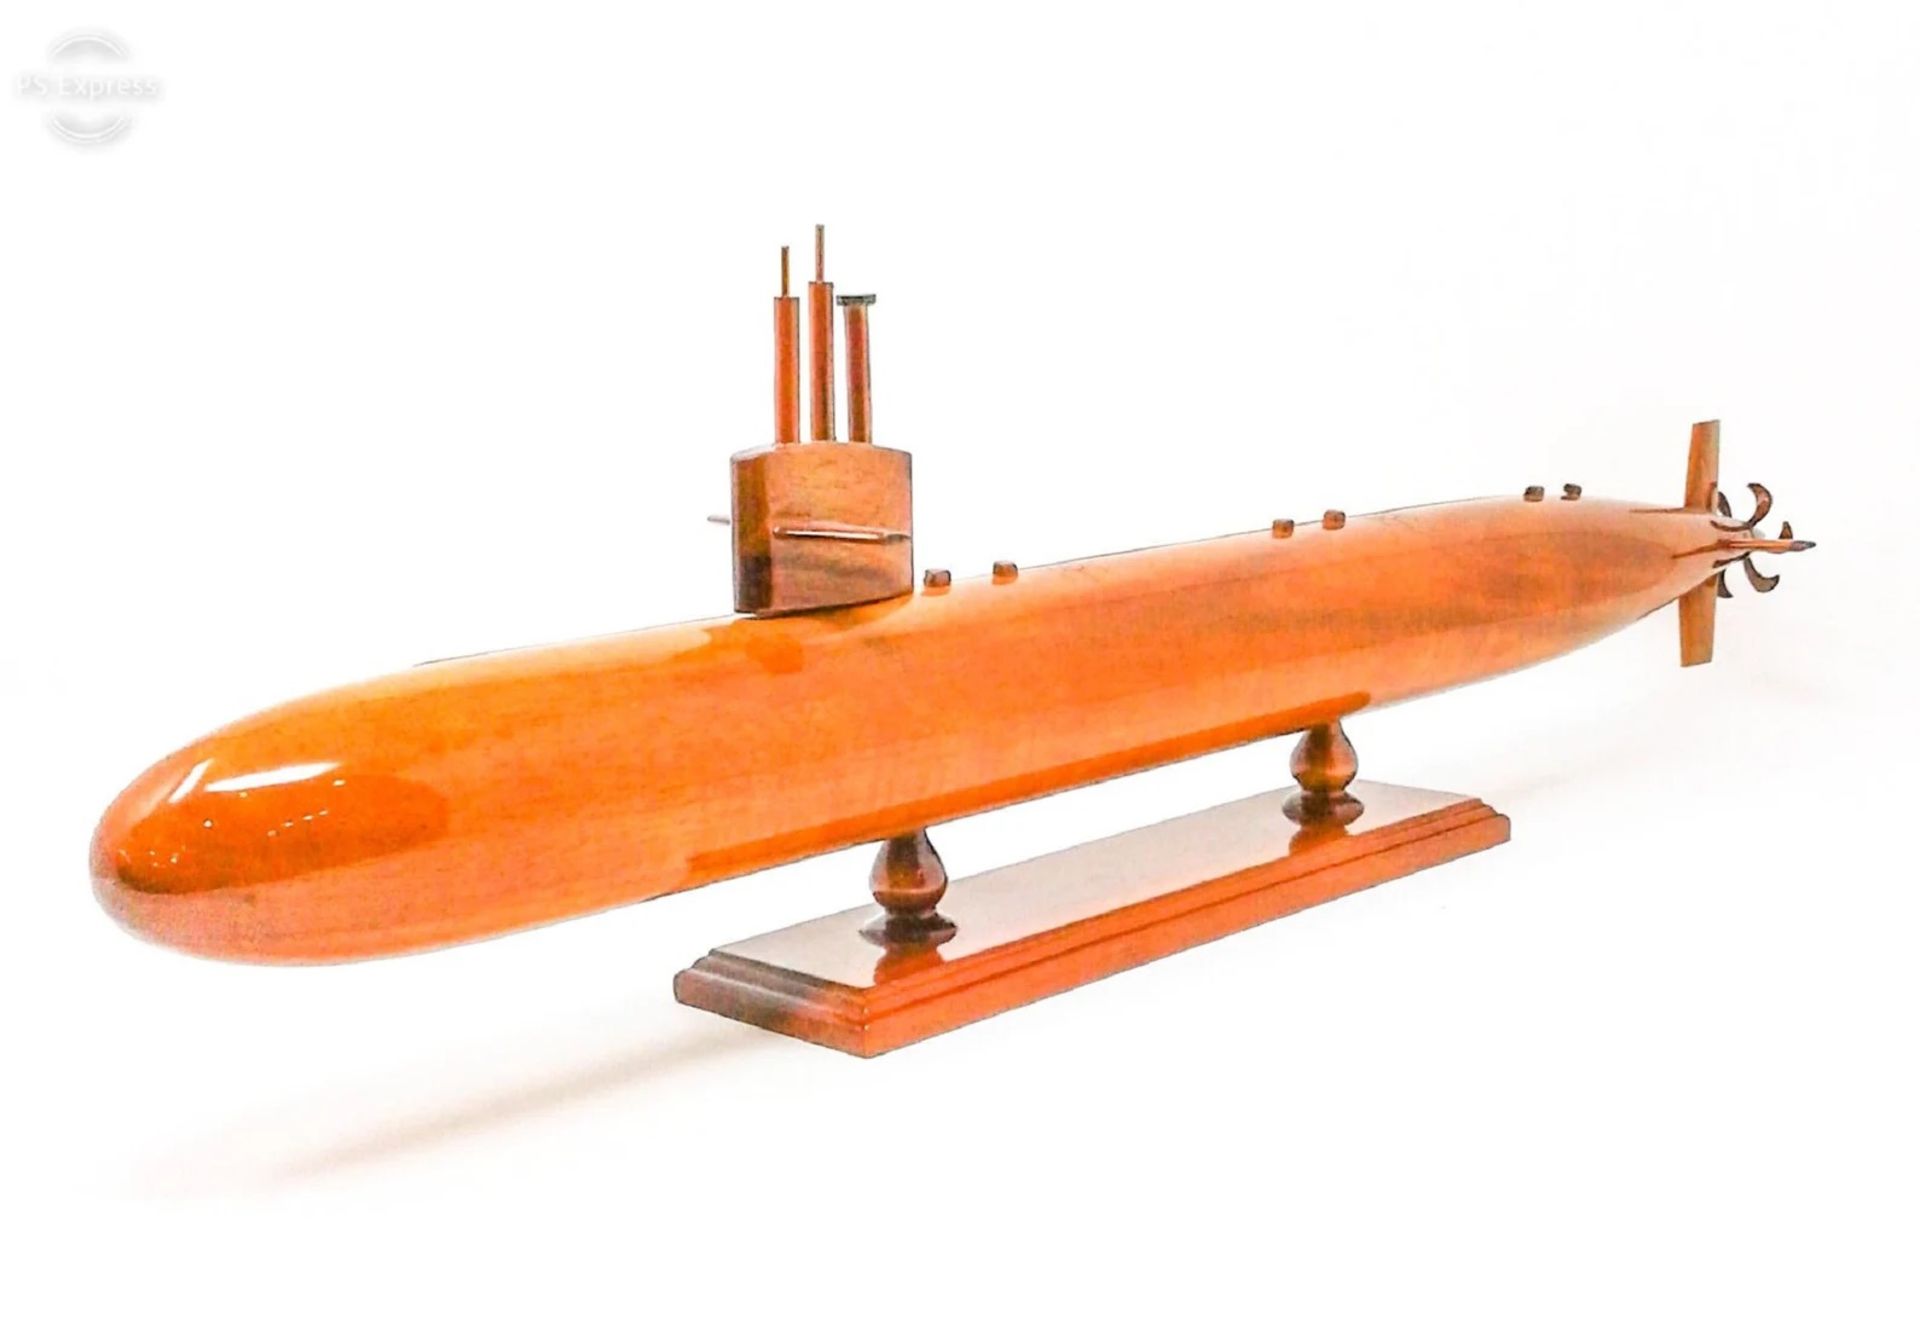 Los Angeles Class Submarine Wooden Seacraft Scale Model